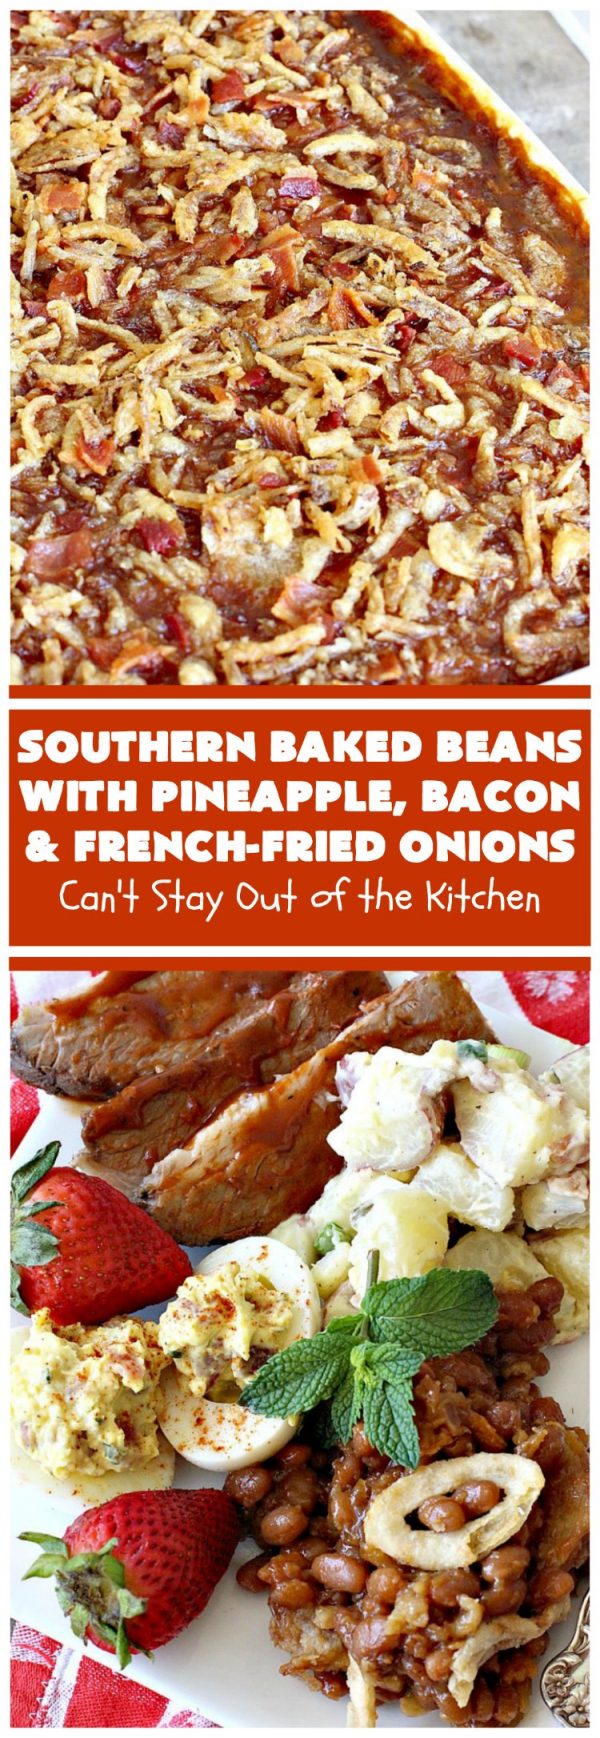 Southern Baked Beans with Pineapple – Can't Stay Out of the Kitchen